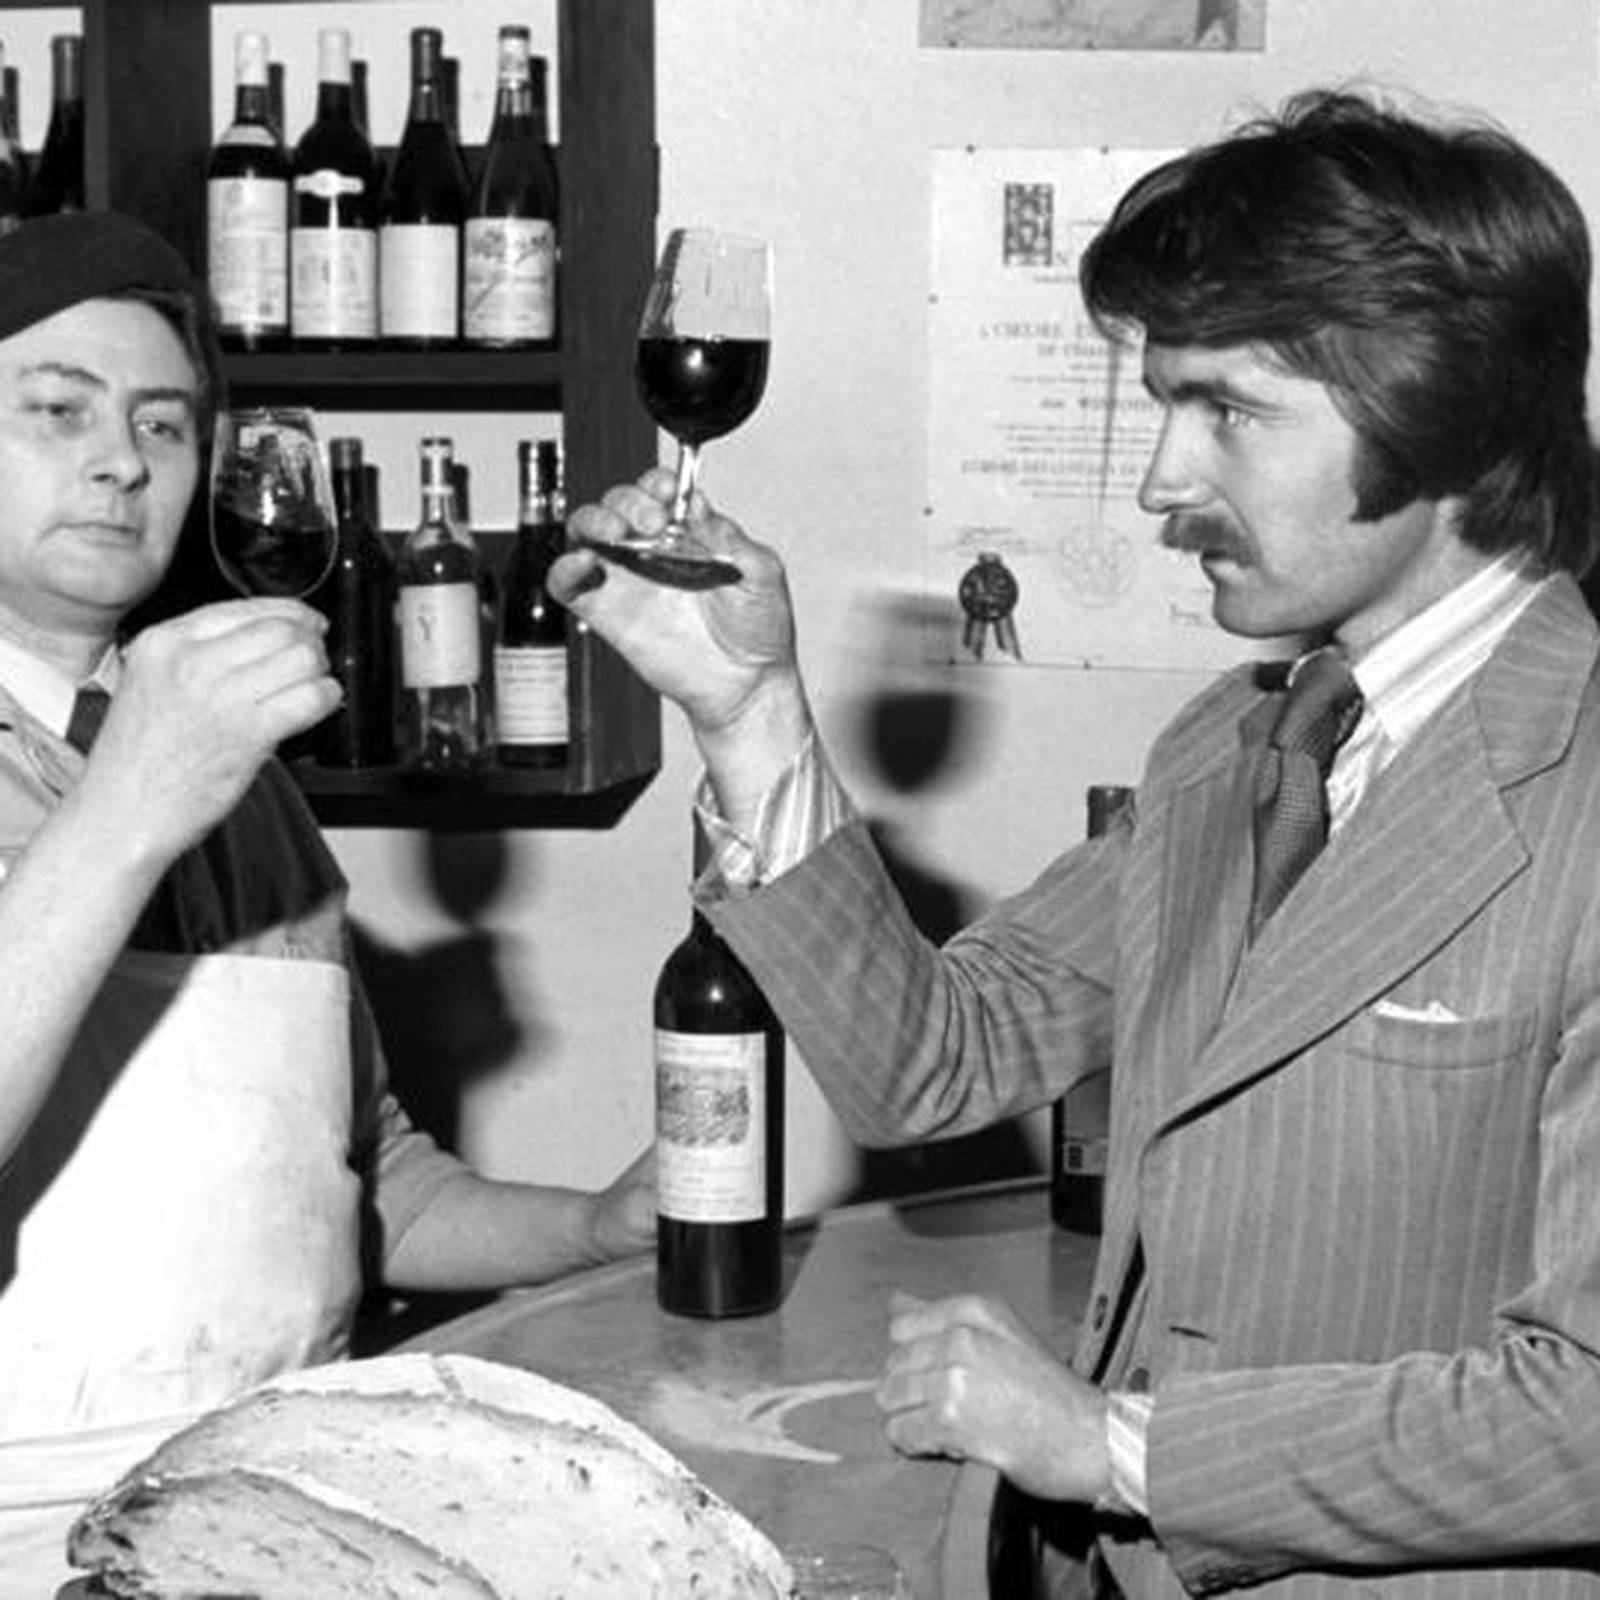 Steven Spurrier obituary: Connoisseur who upended the wine world – The  Irish Times